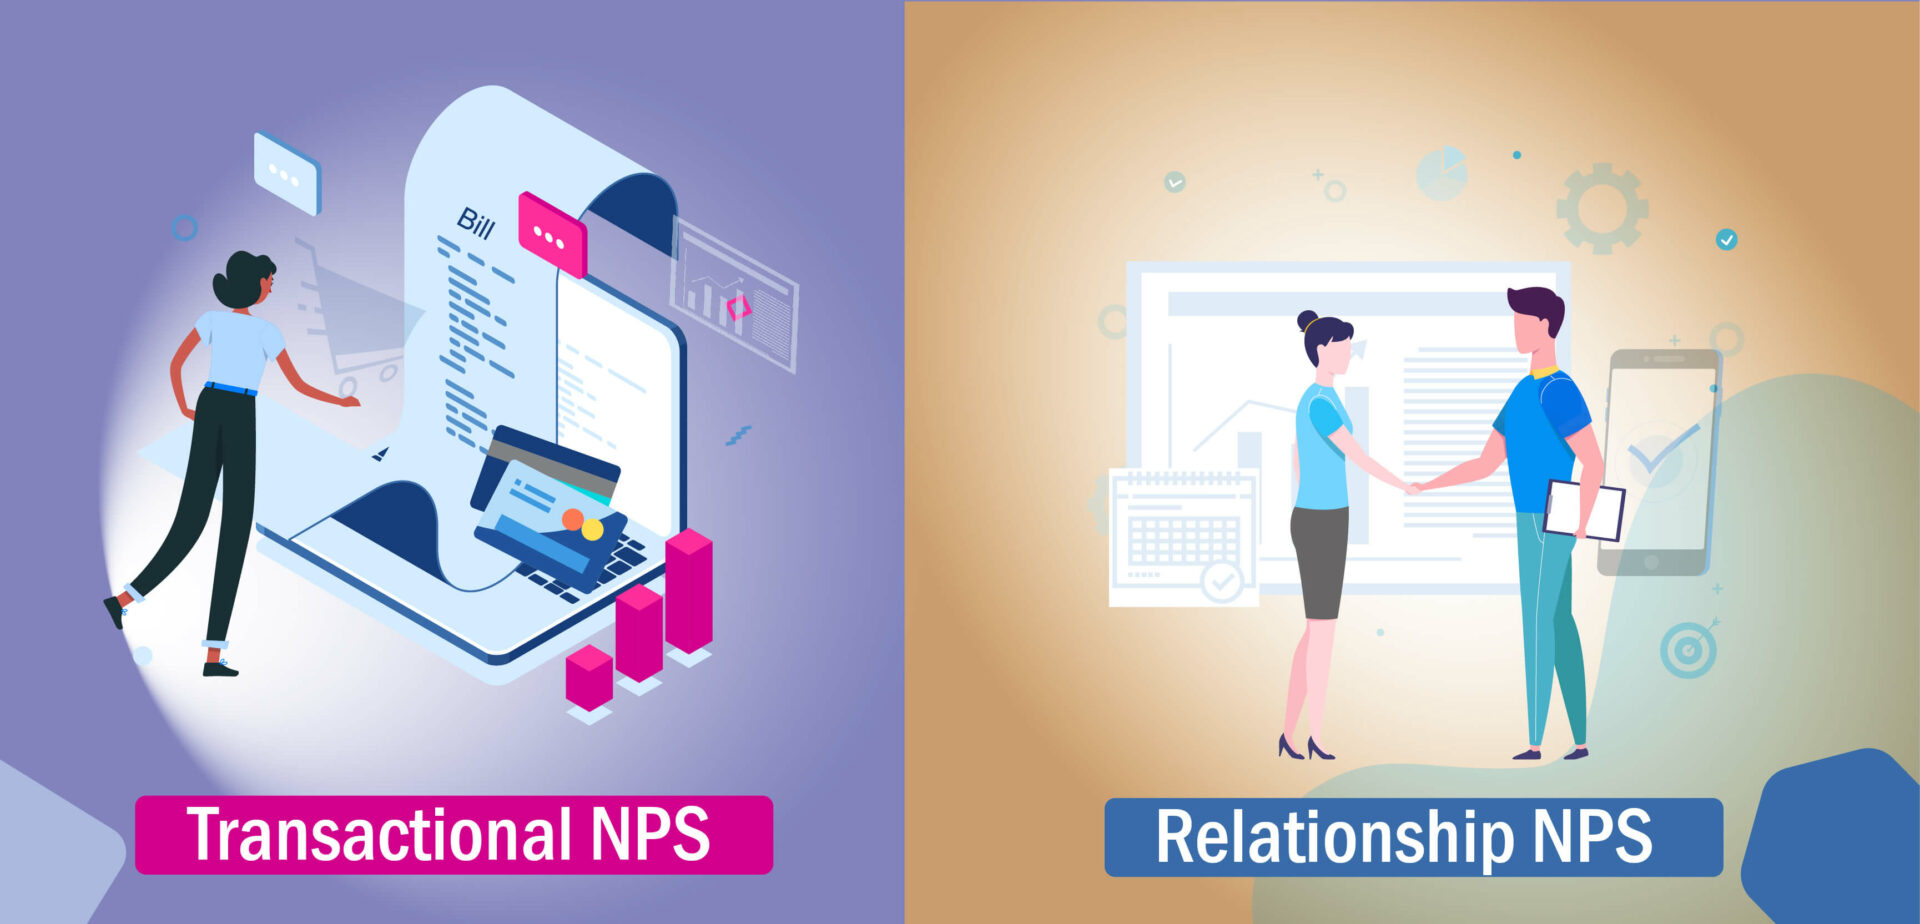 Transactional NPS and Relationship NPS